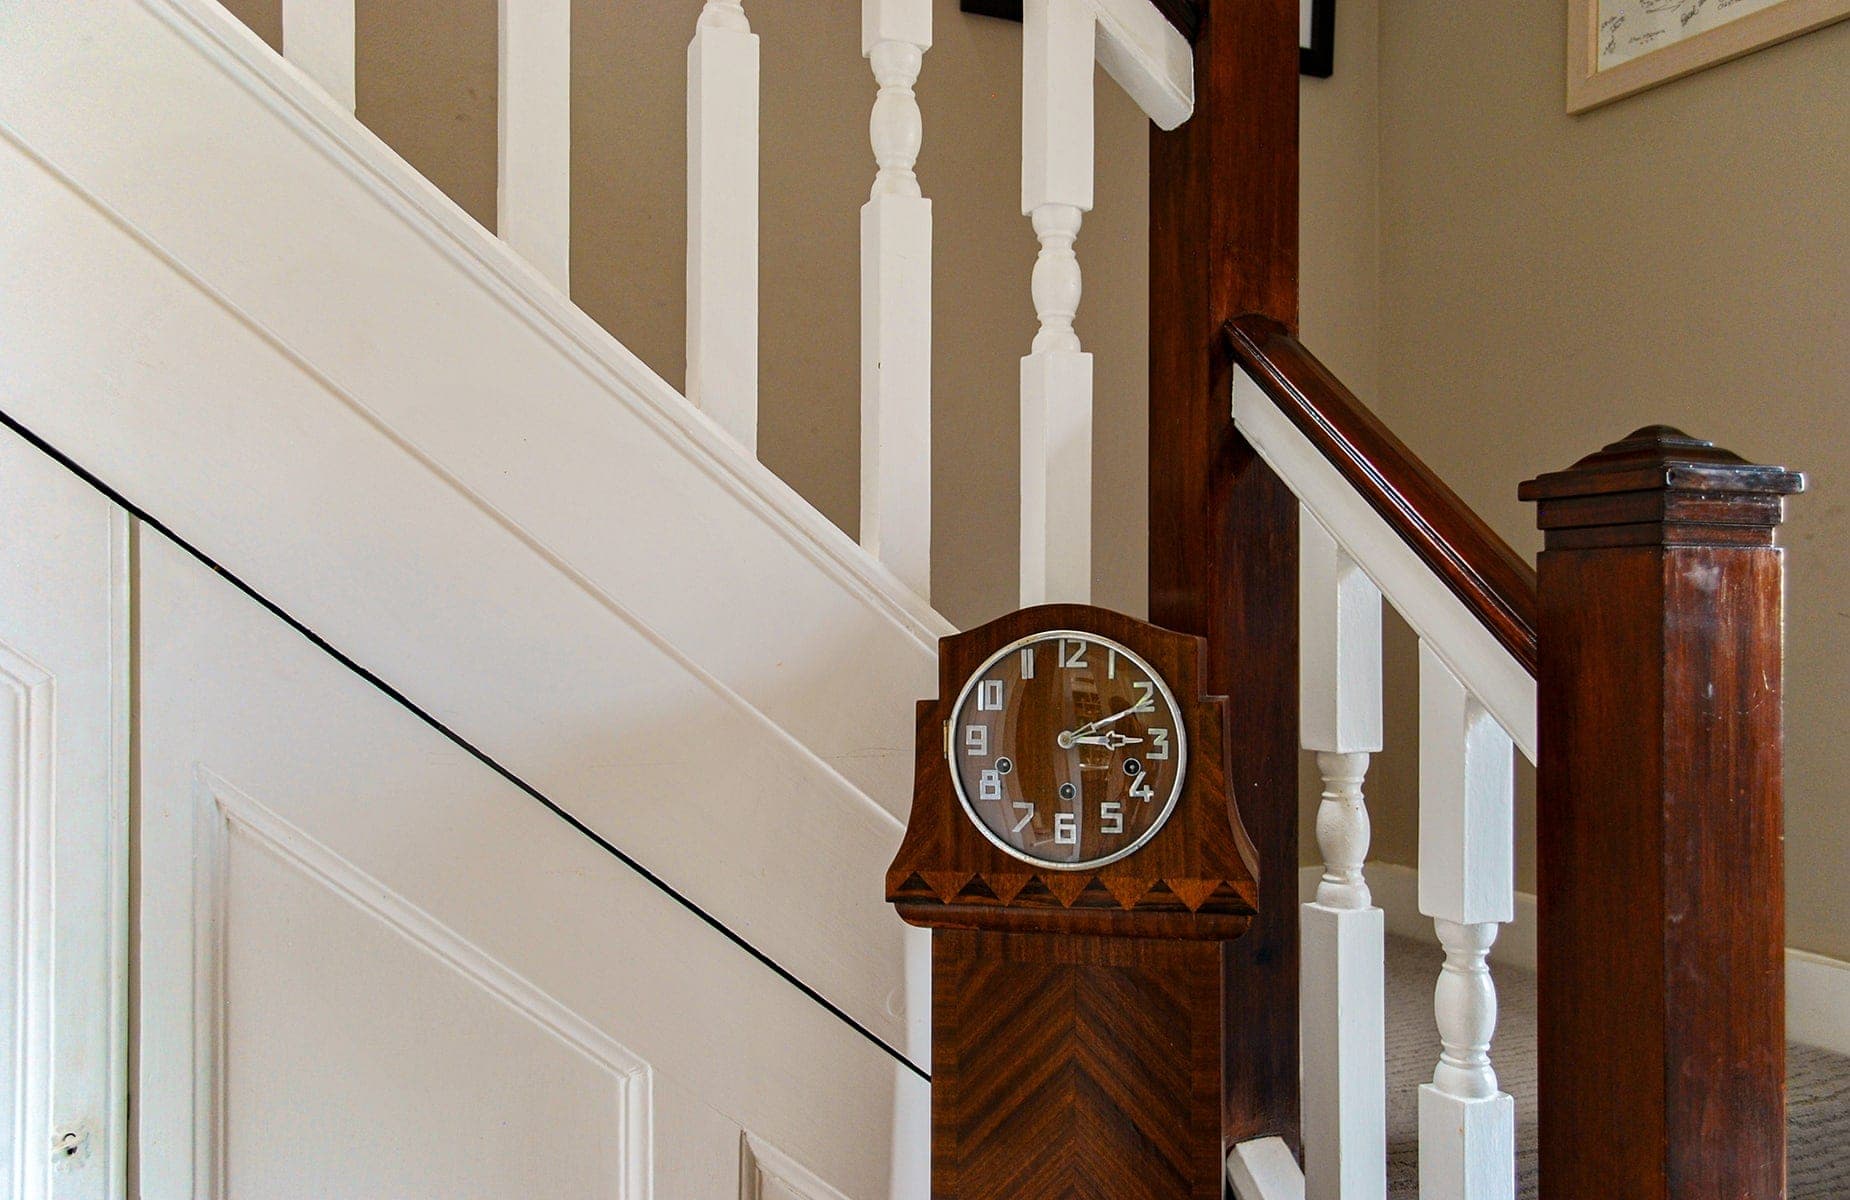 Original staircase has been refurbished and reinstated to retain the 1930s Arts & Crafts charm